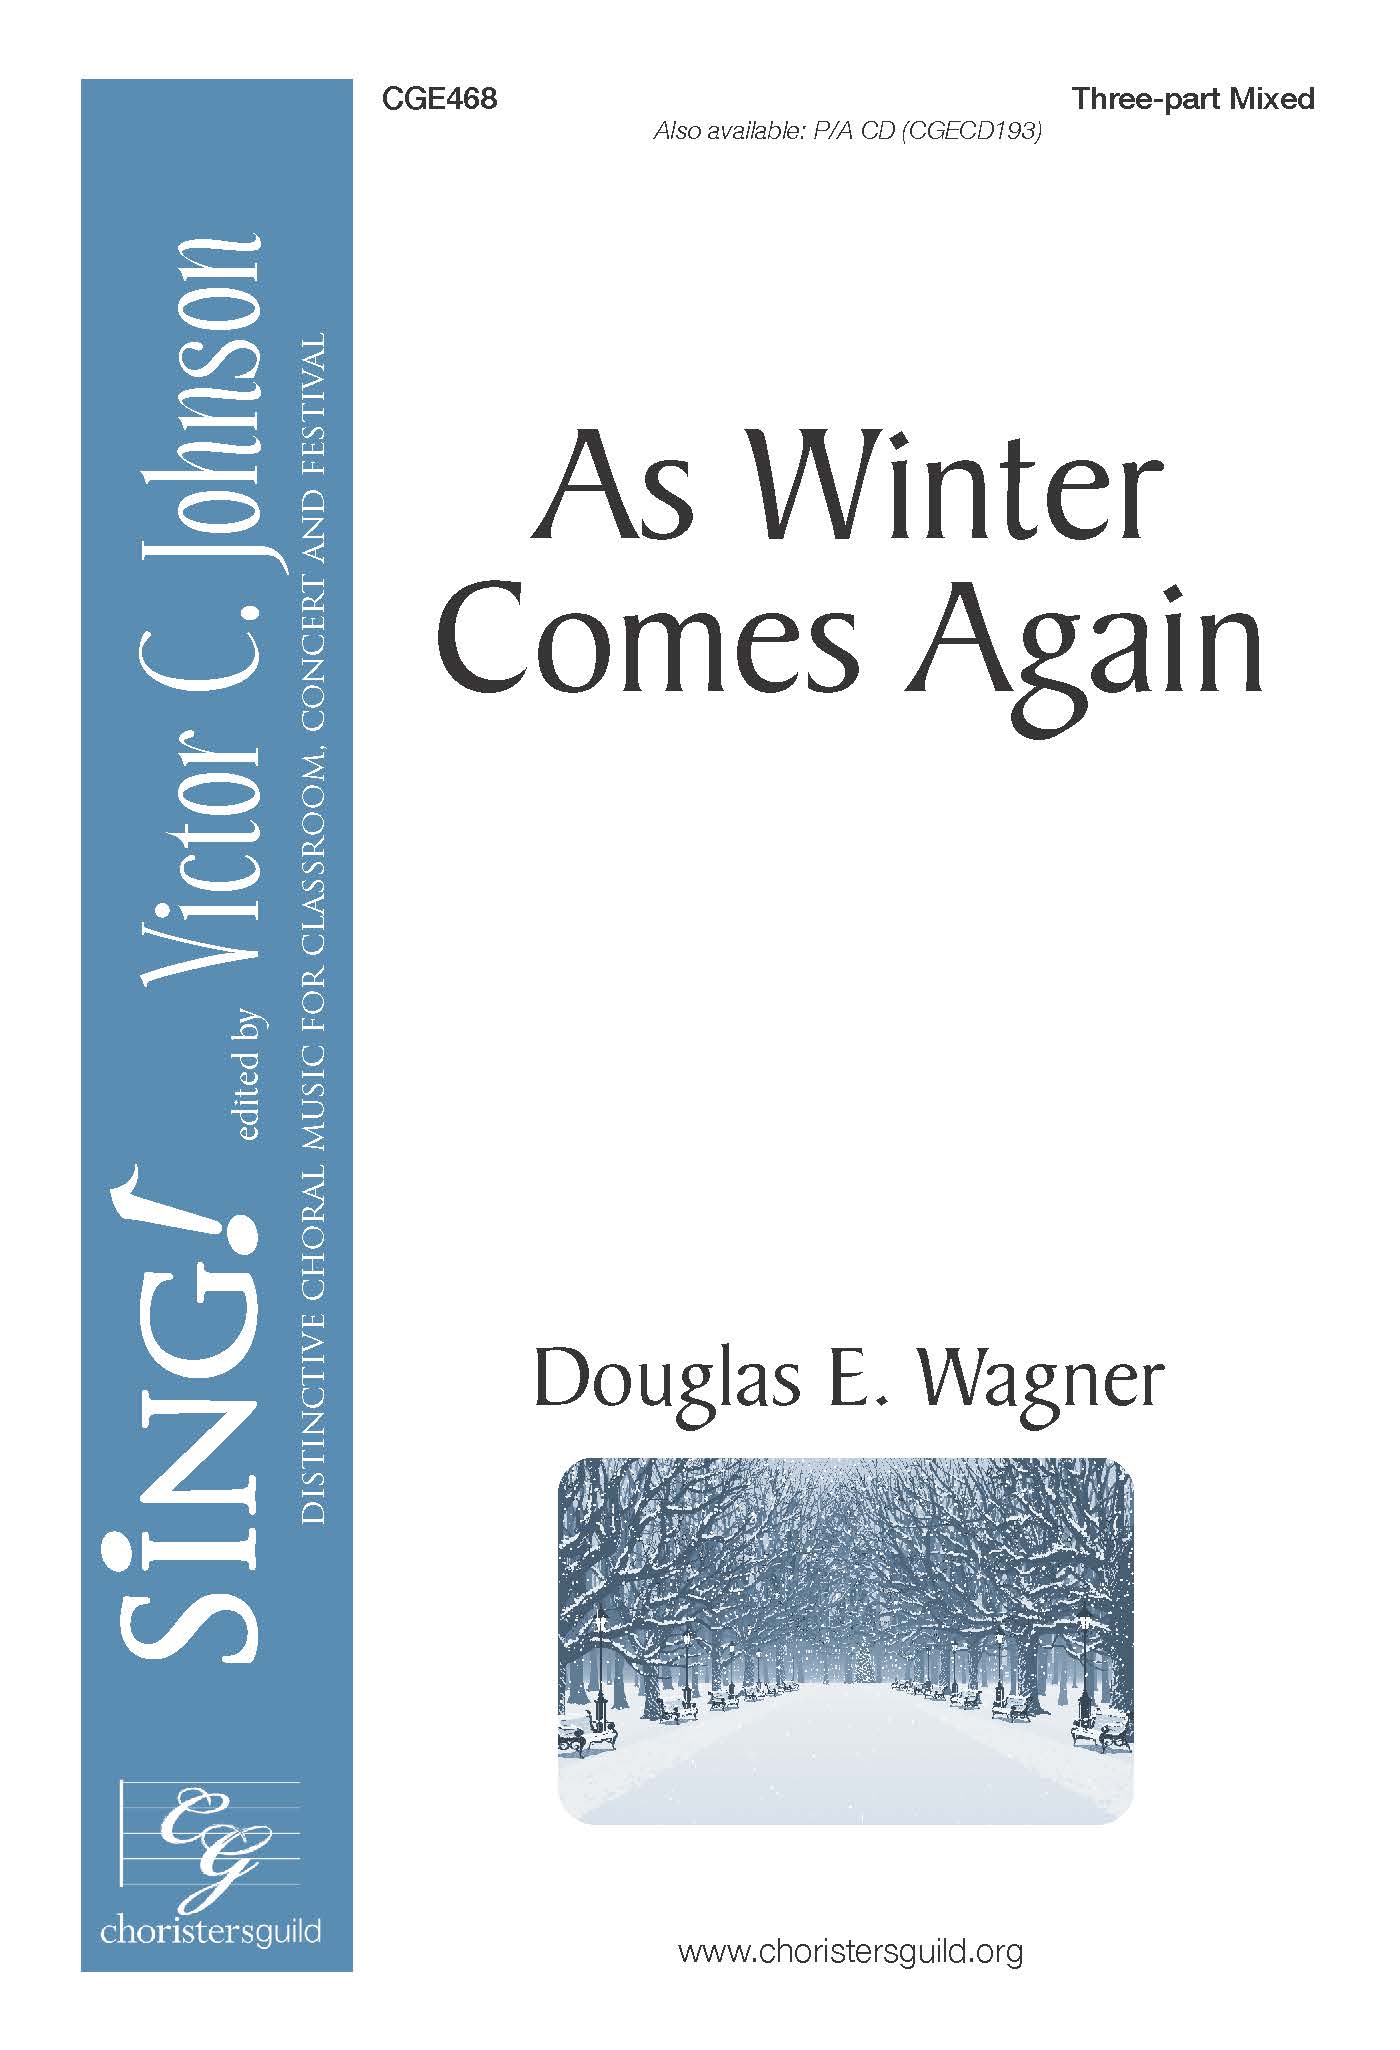 As Winter Comes Again - Three-part Mixed